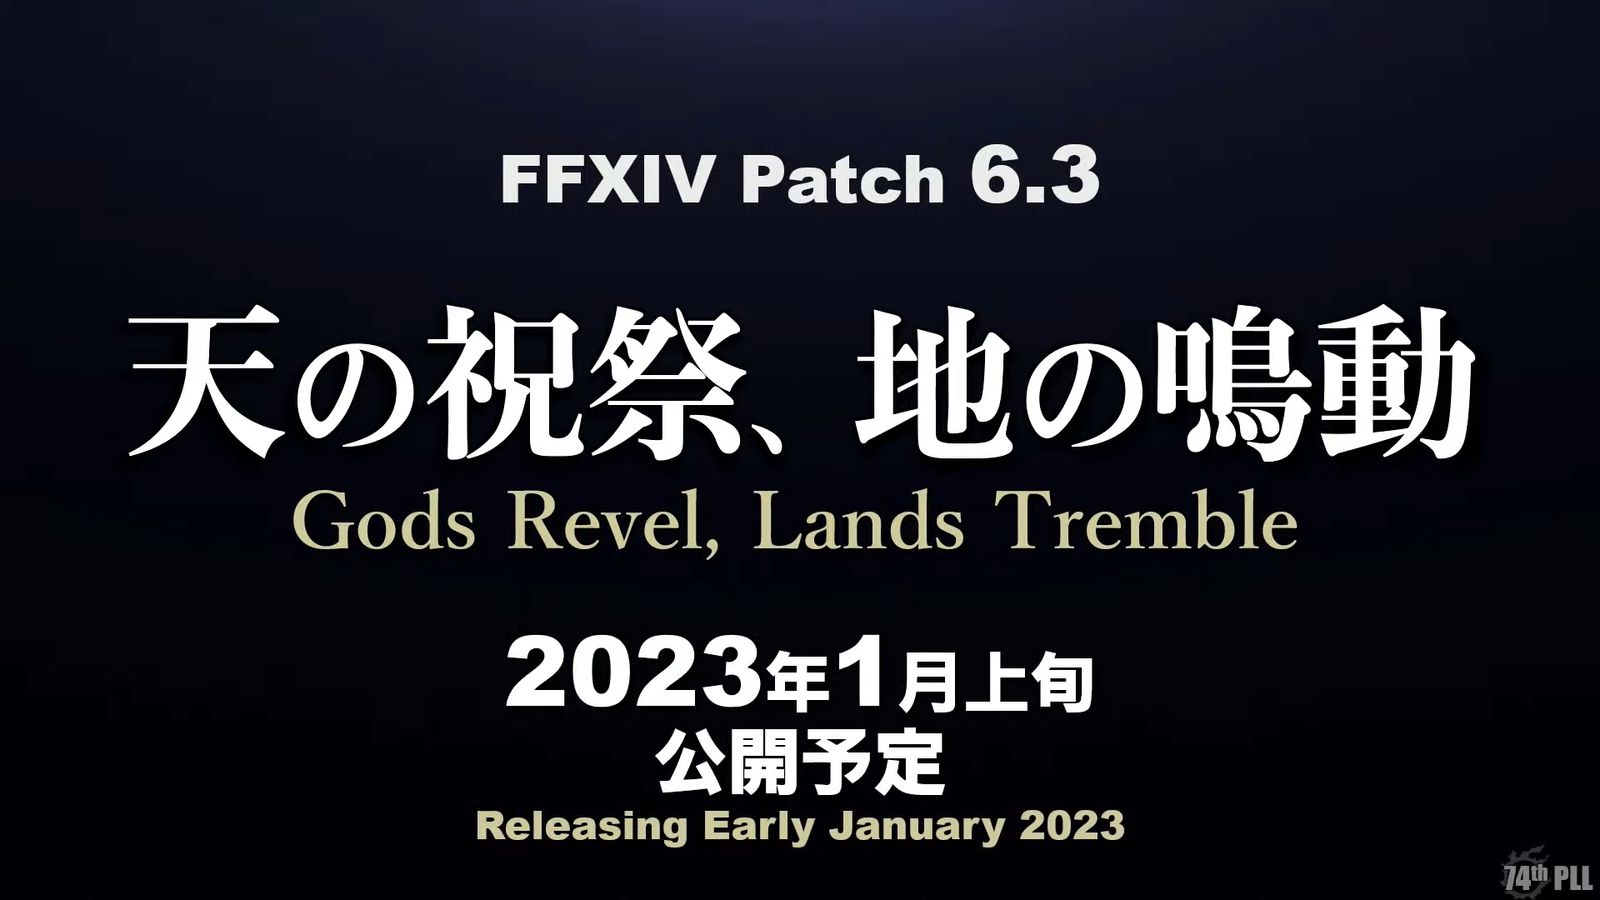 FFXIV's 6.3 patch is releasing in 2023.